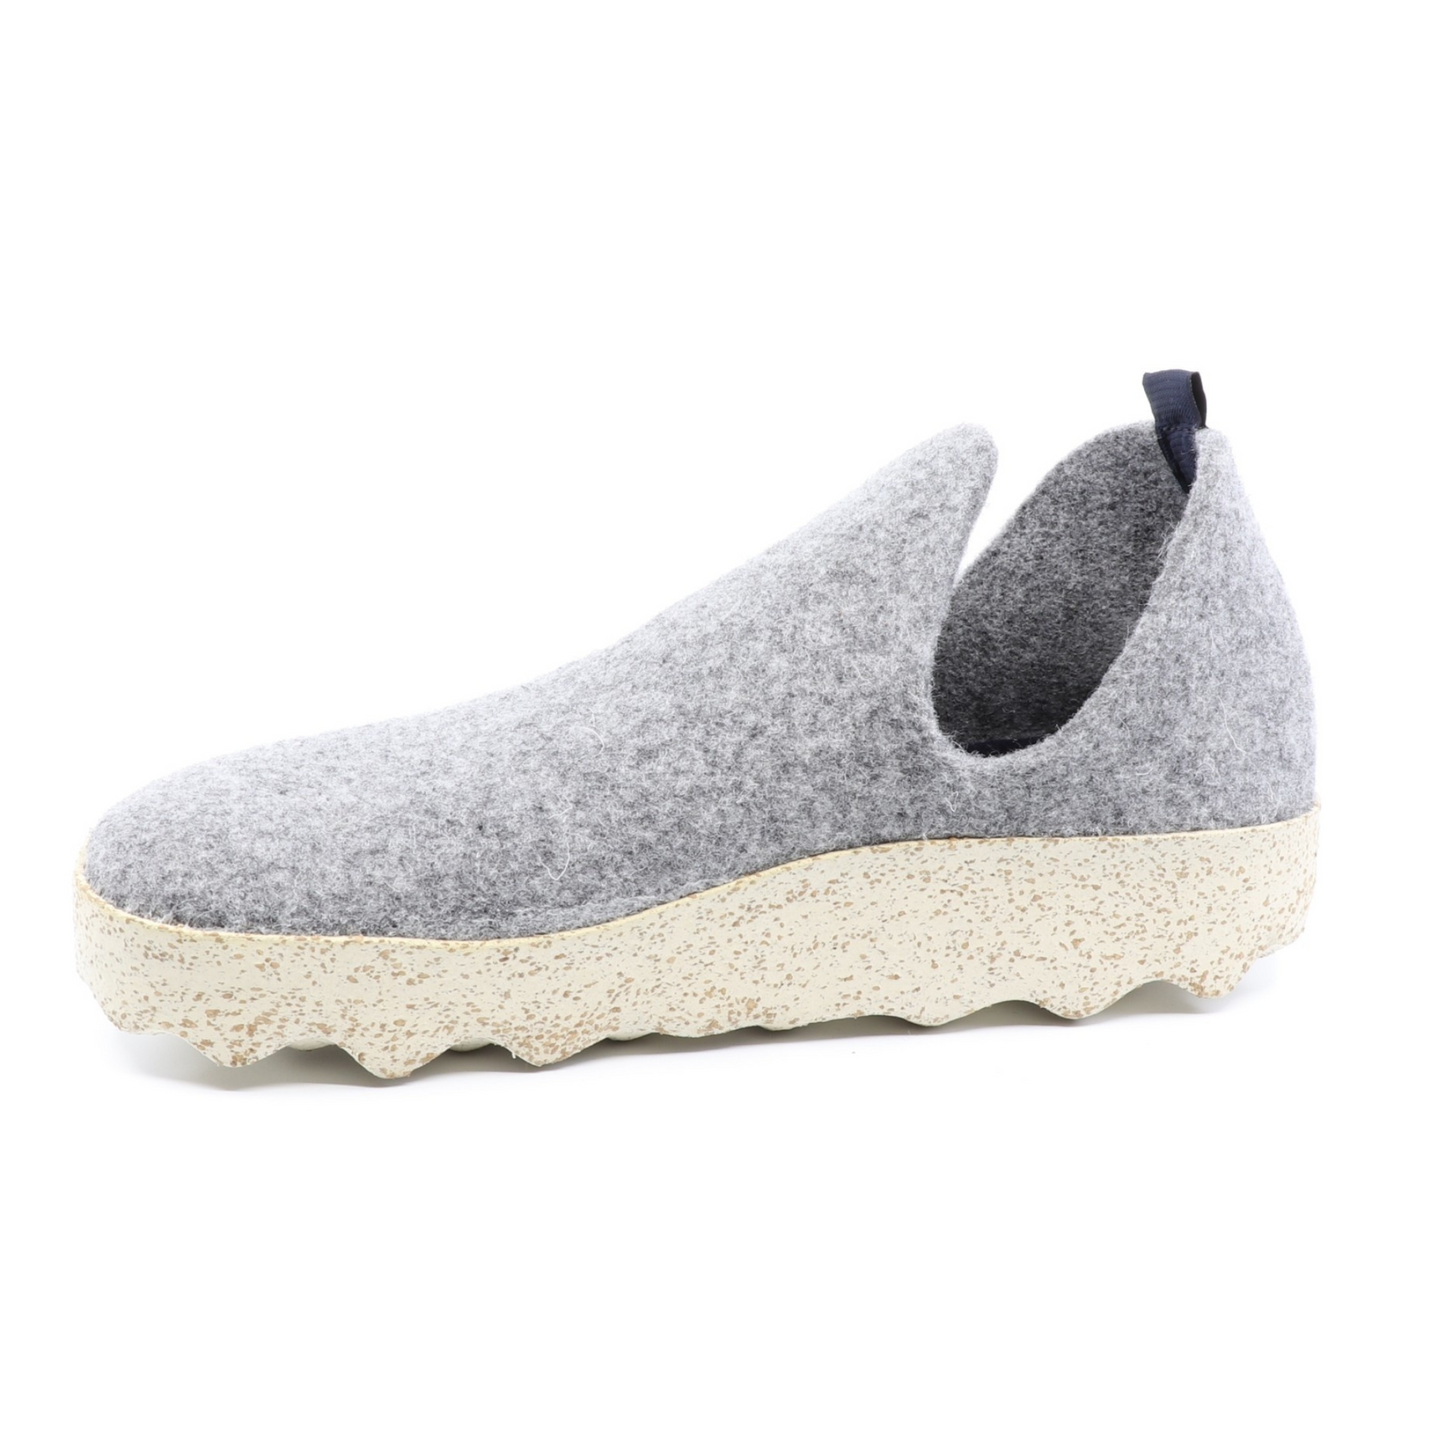 A light grey wool sneaker with oblong cutouts, navy heel tab, and cream cork soul is pictured in profile.